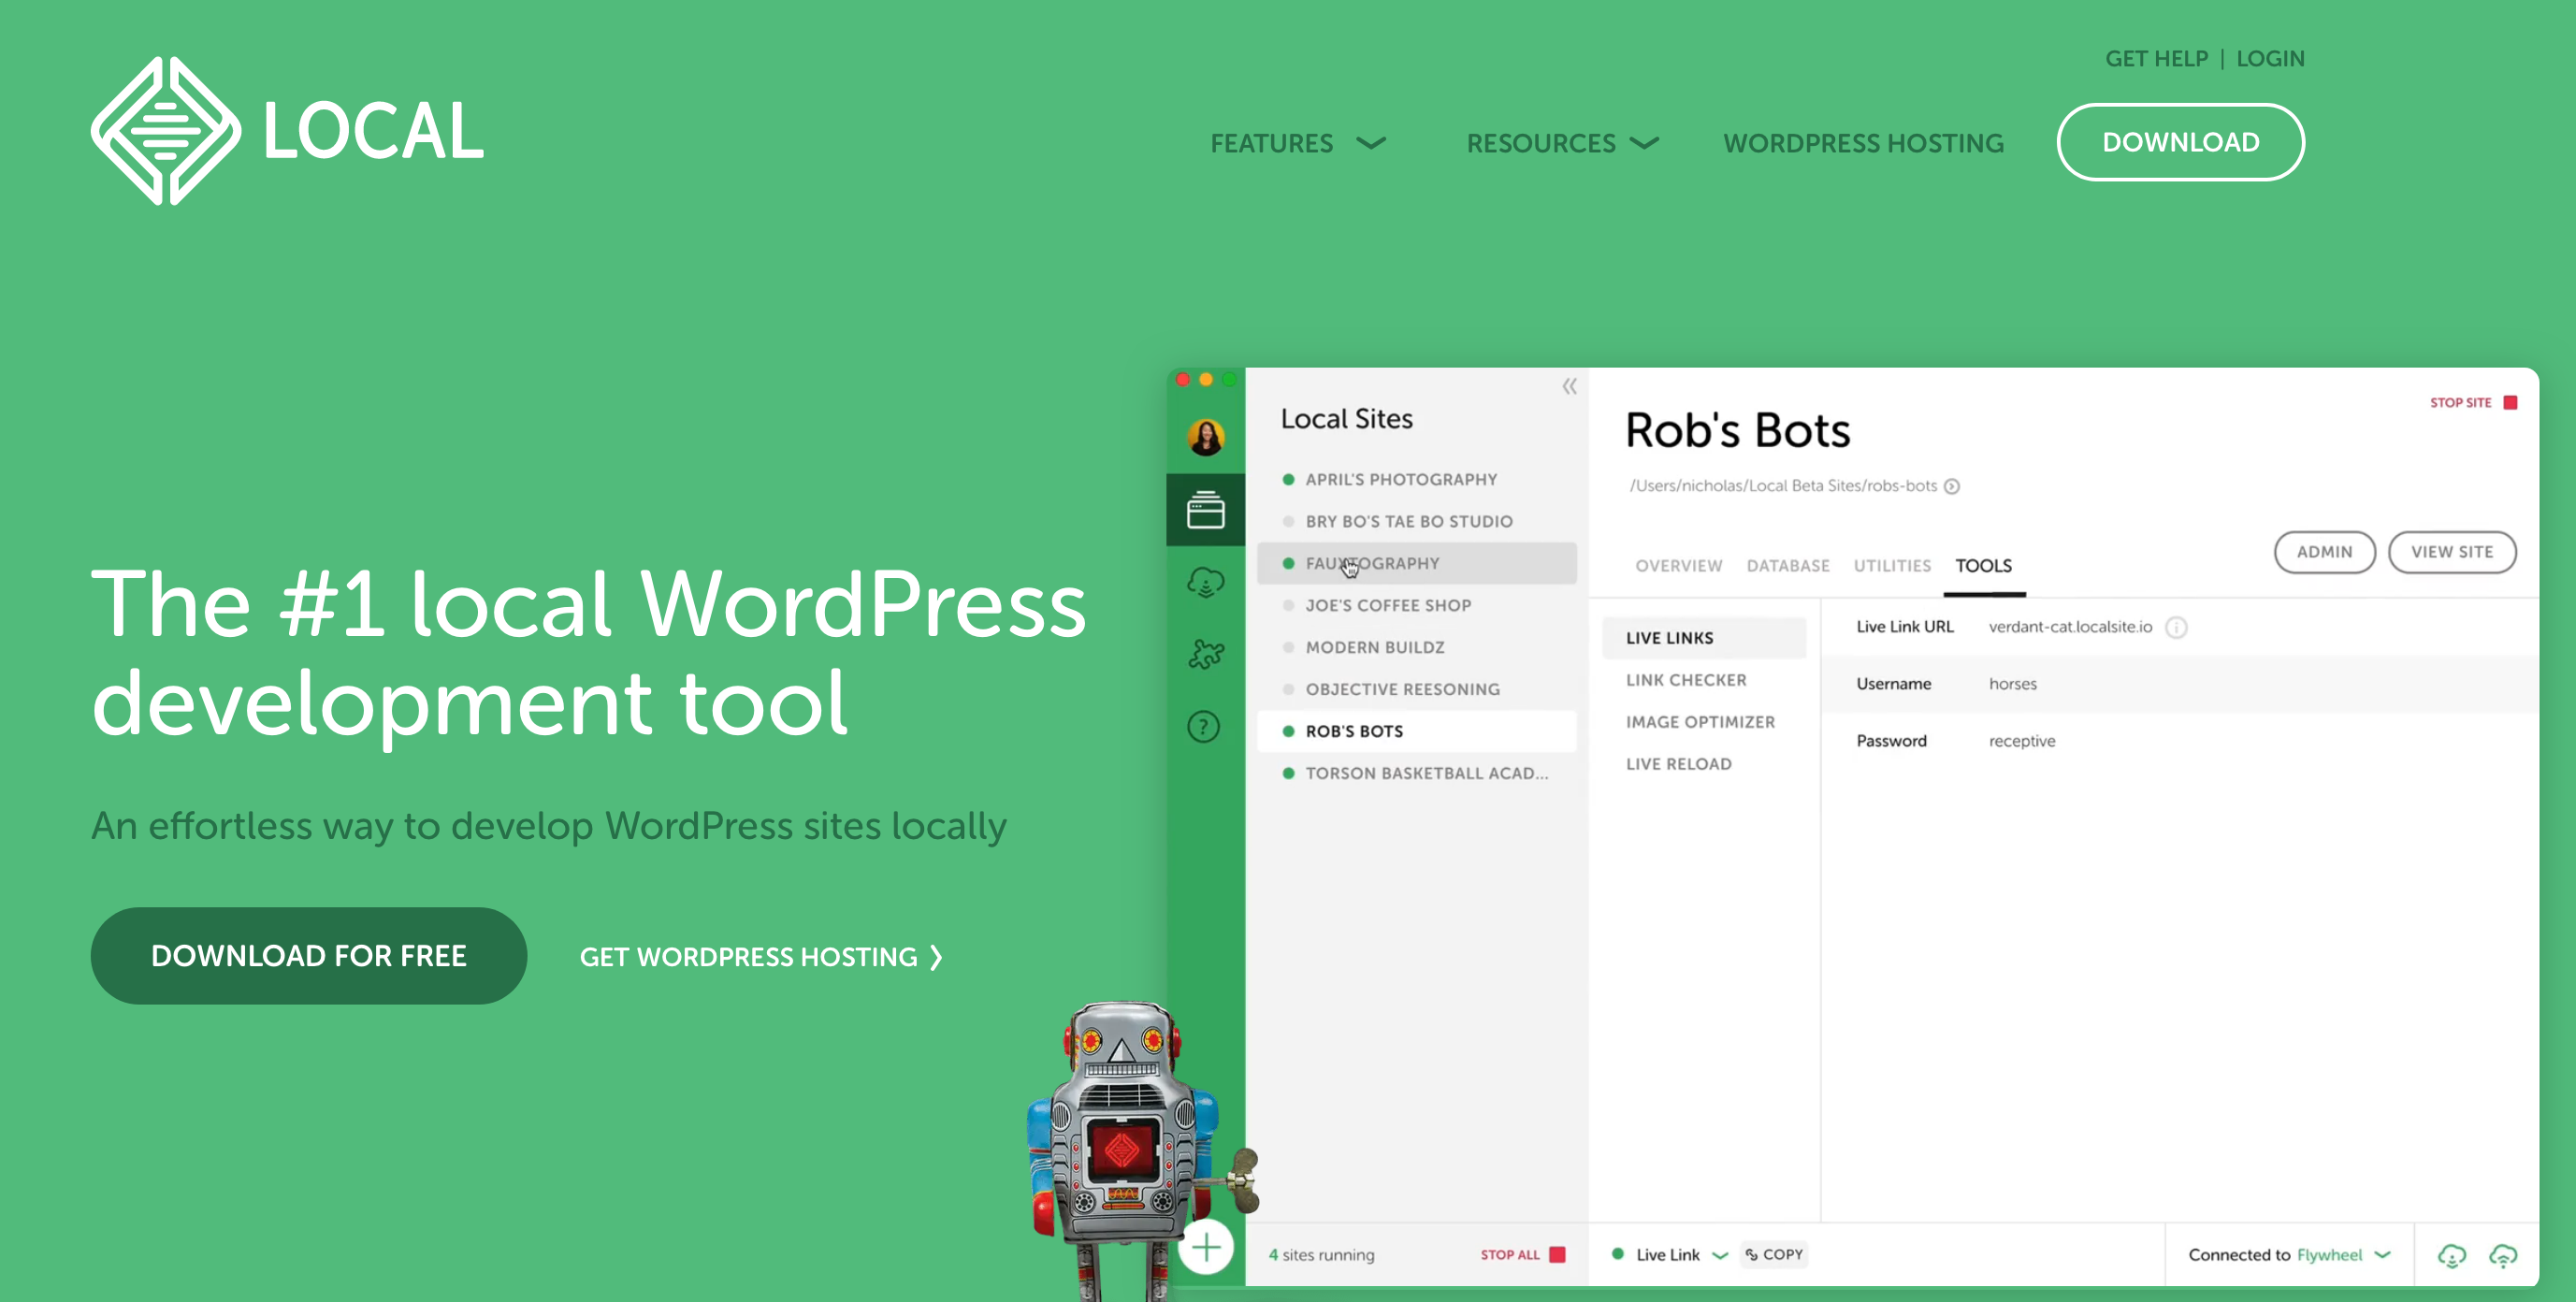 Local is a free tool for developing WordPress sites locally.